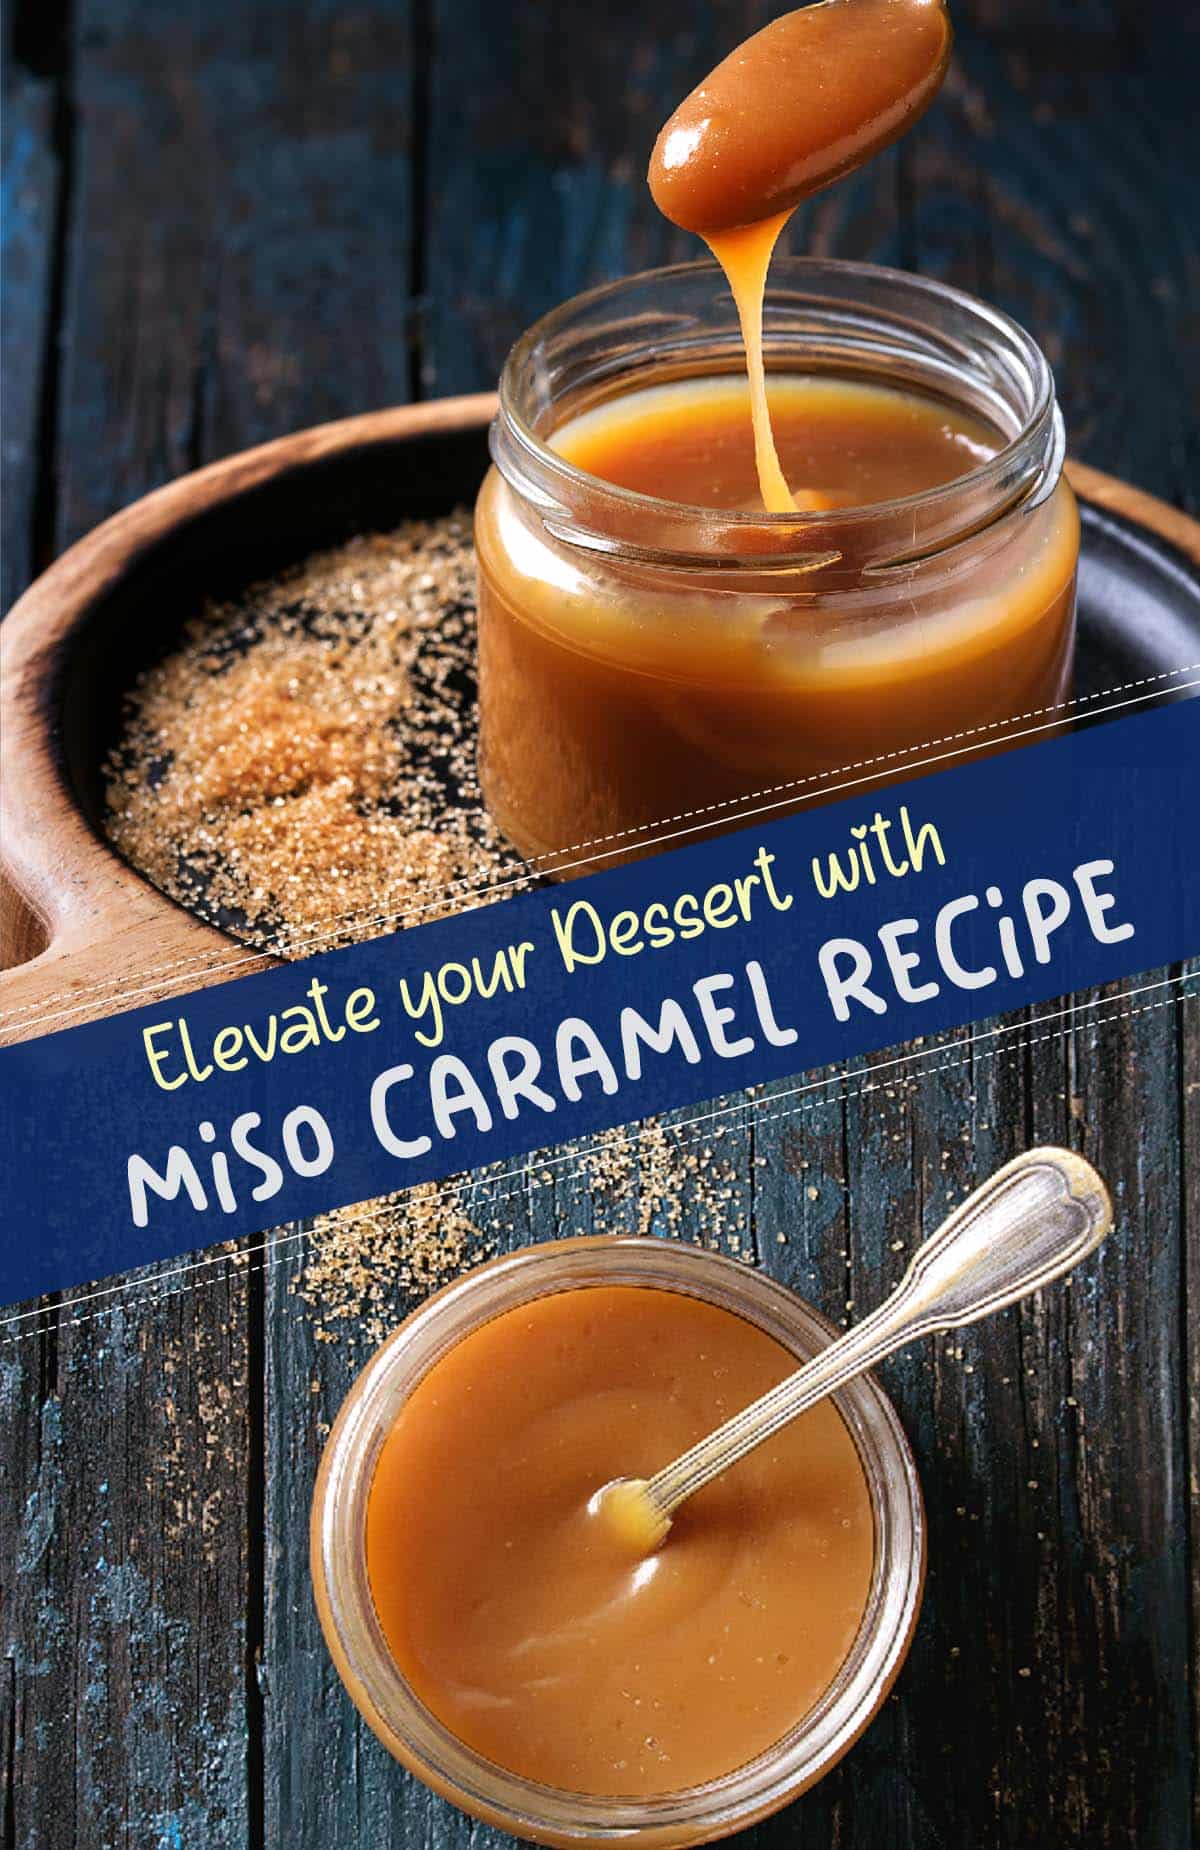 What is Miso Caramel all about? Think of it as a cousin to salted caramel, but with a twist. Instead of salt, miso paste adds a touch of saltiness and a distinctive umami flavor known as the "fifth taste.